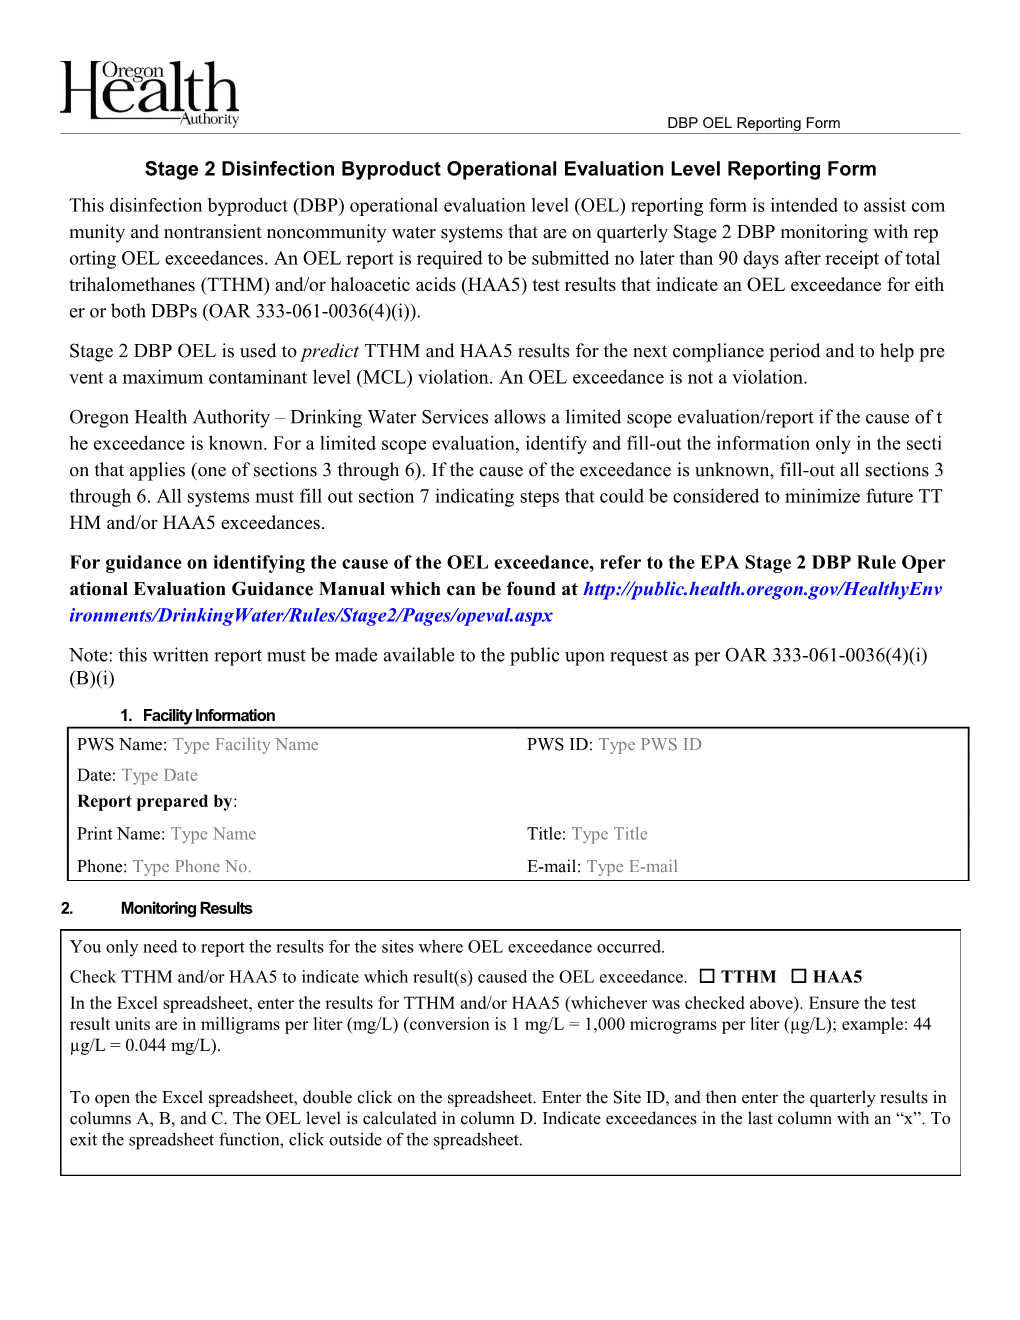 Stage 2 DBP: Operational Evaulation Levels Report Template